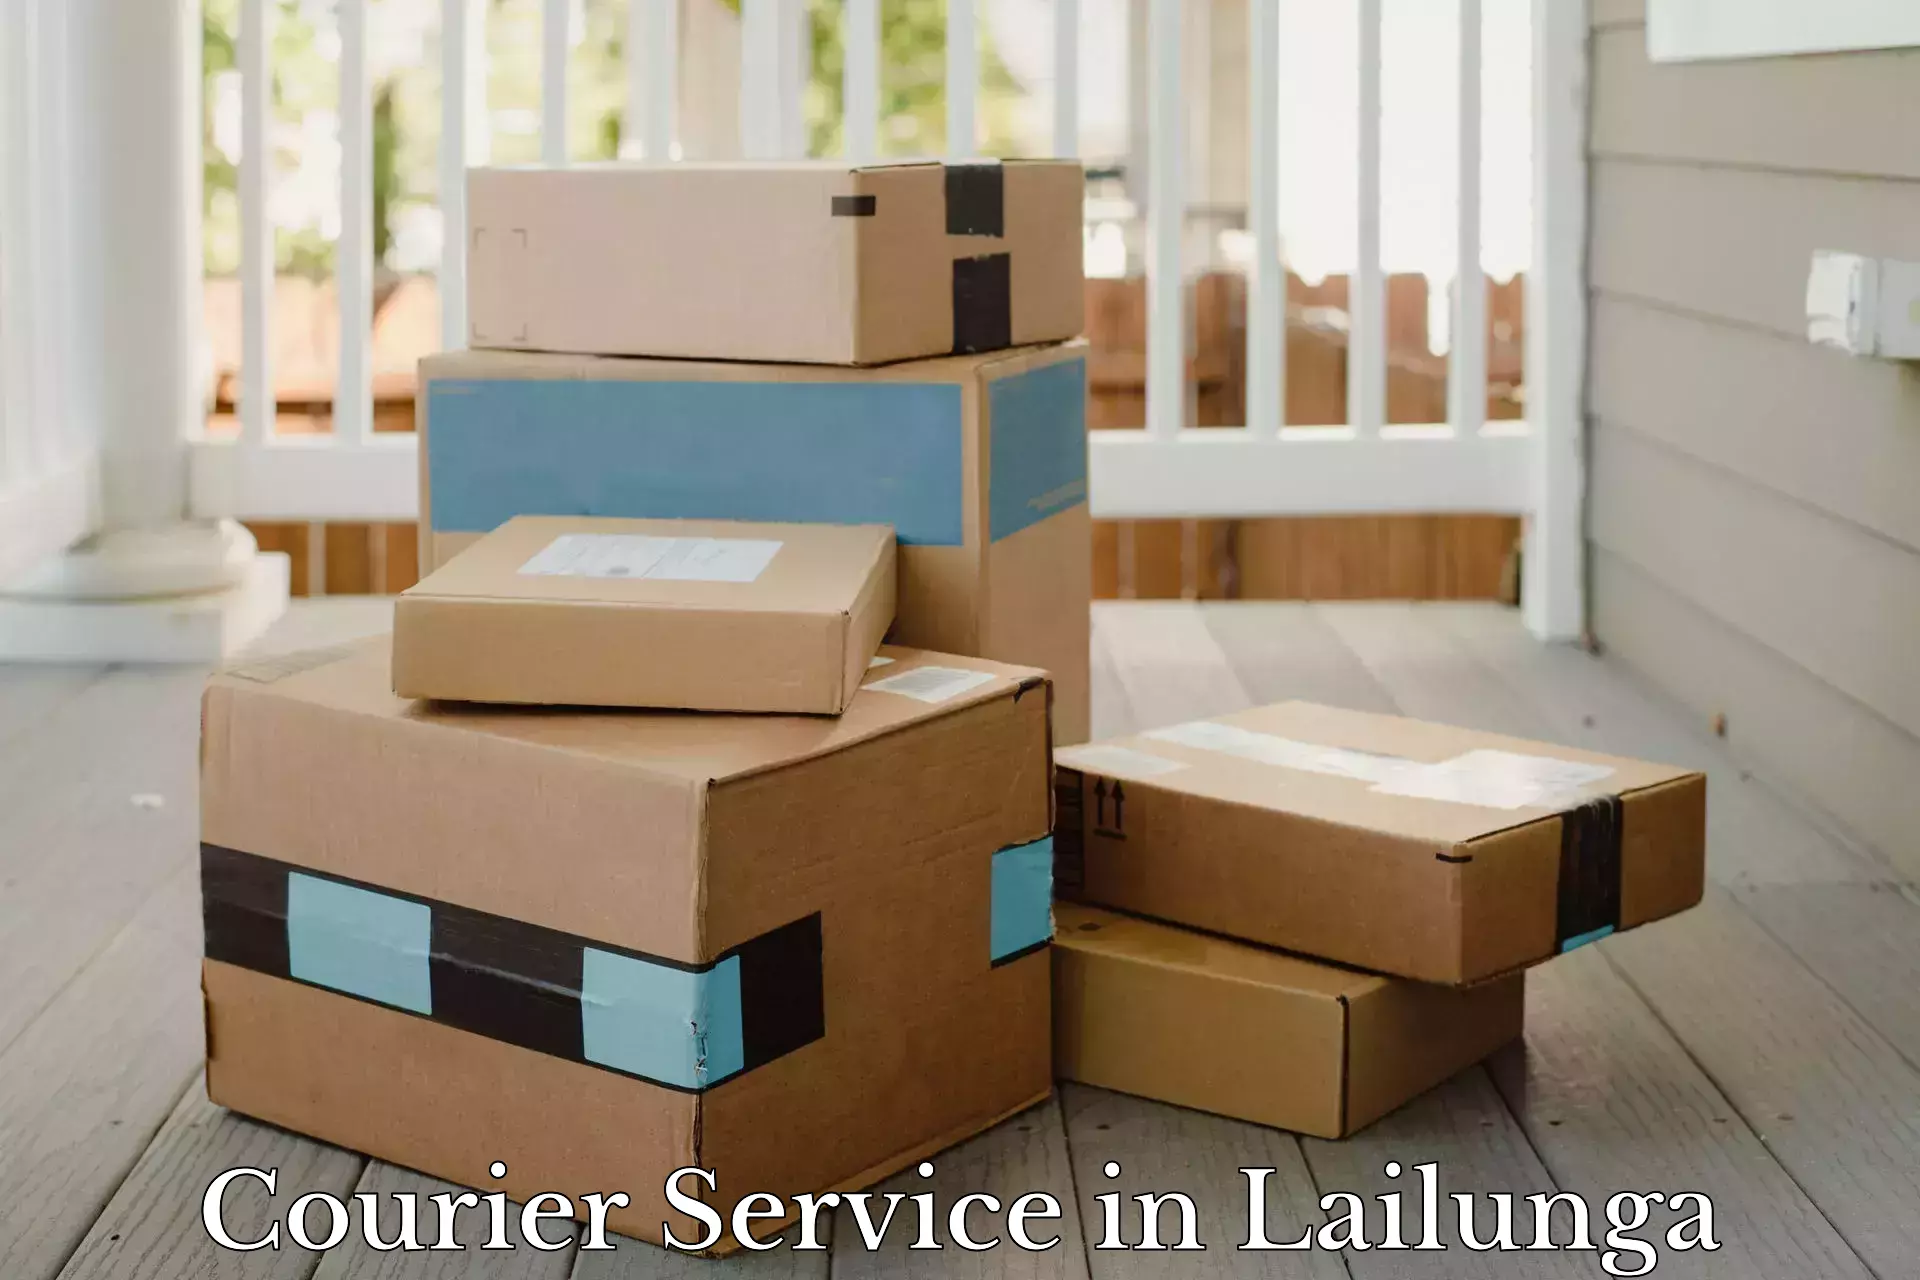 Retail shipping solutions in Lailunga